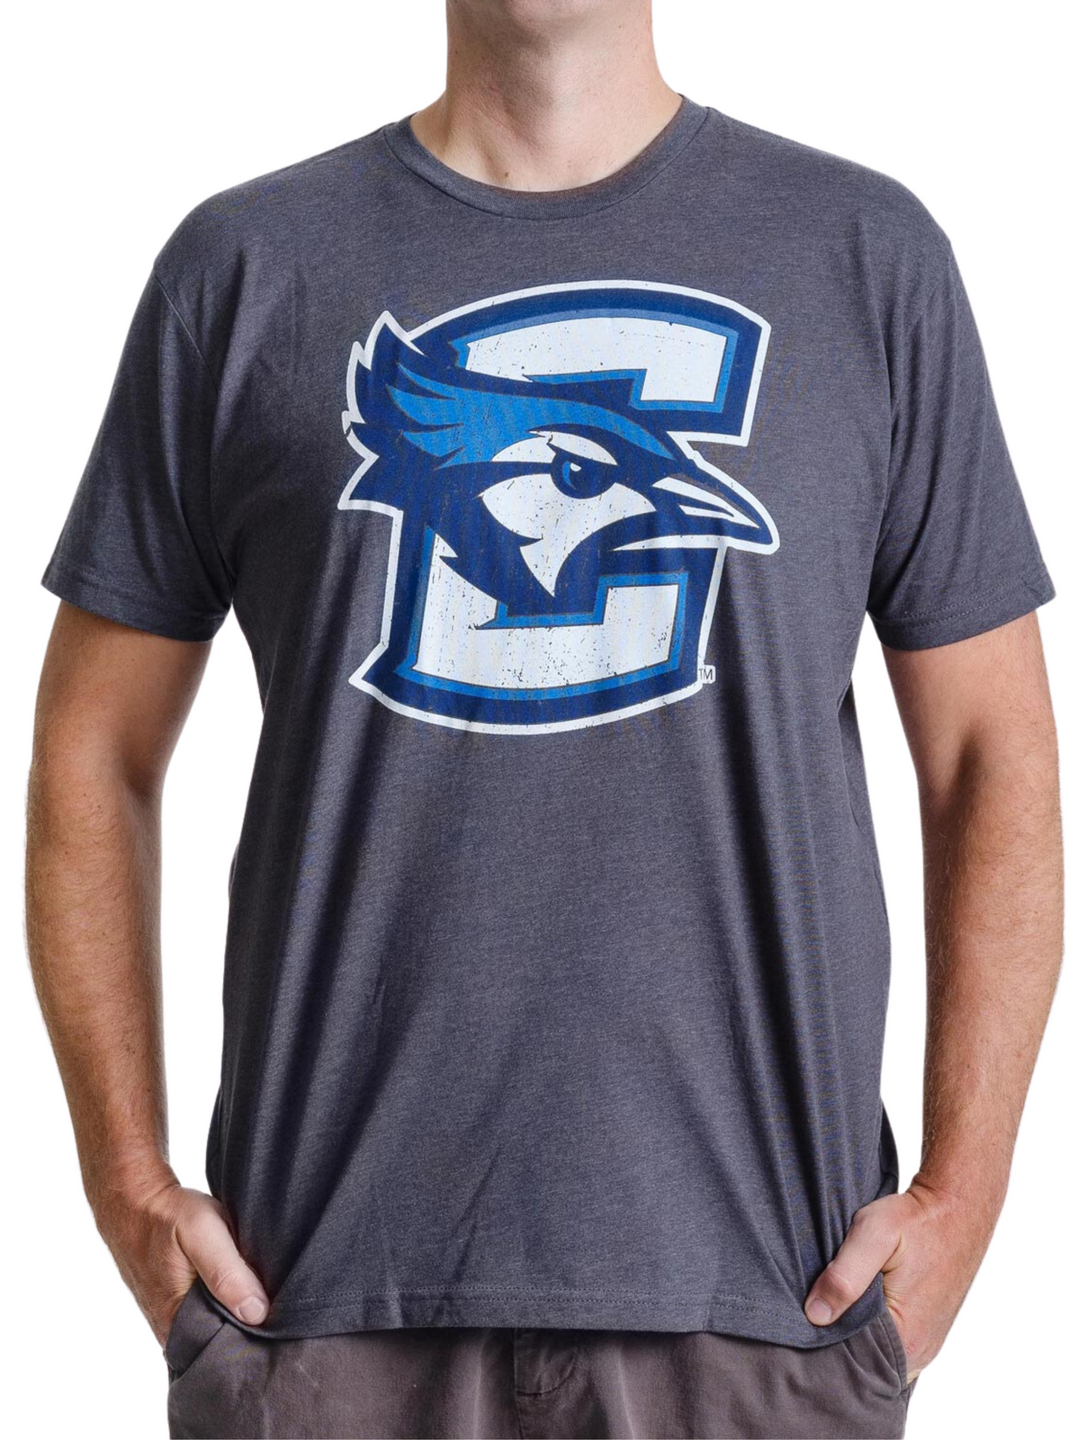 Creighton University White and Blue "C" with Bluejay Grey Shirt